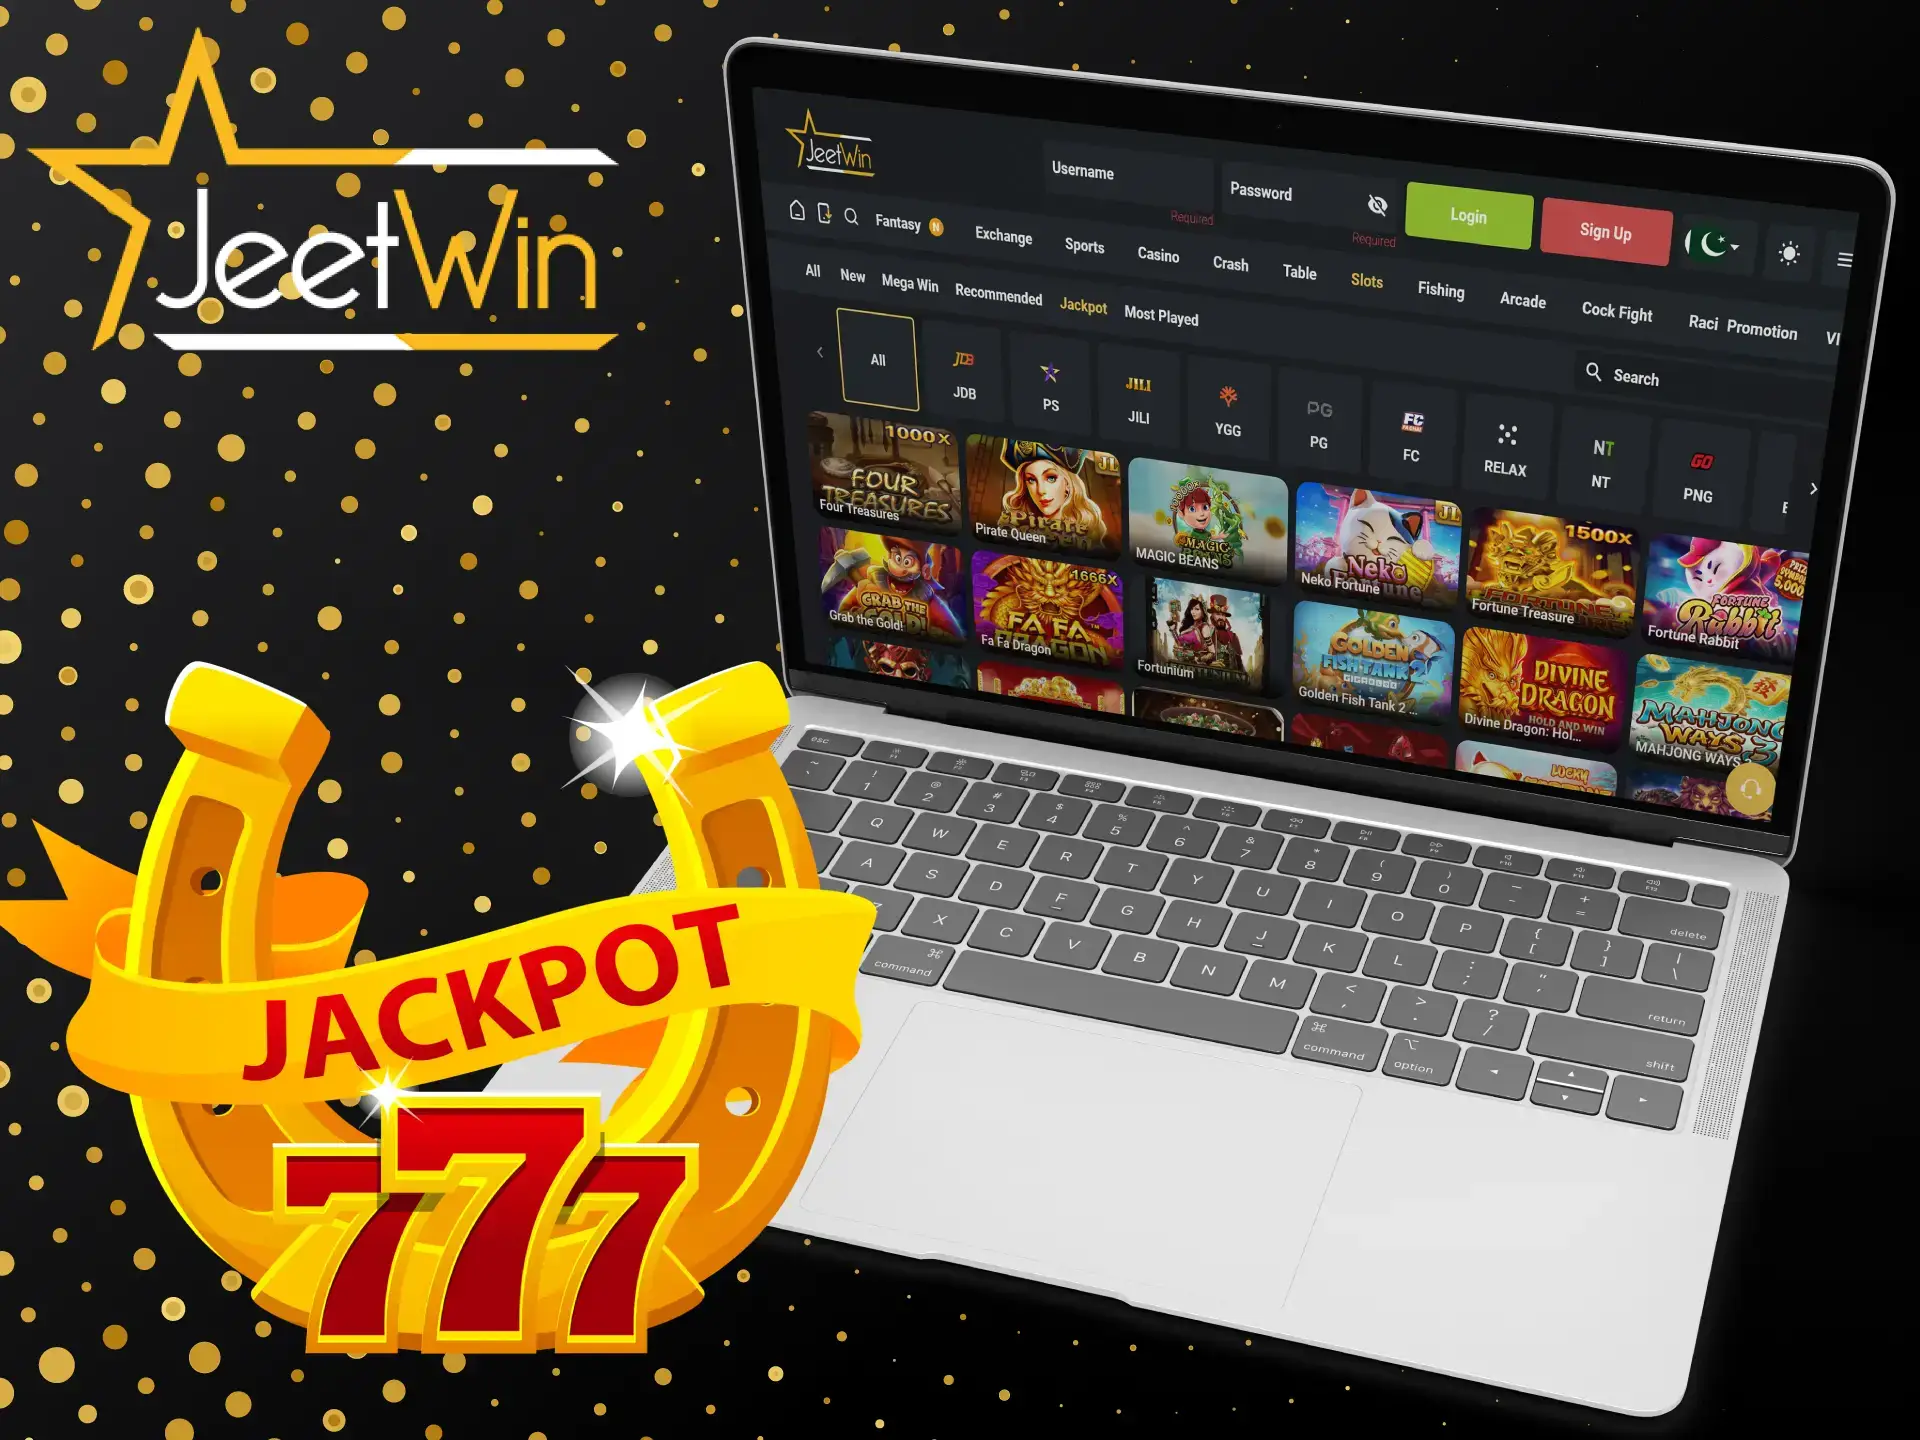 Try your luck by playing jackpot slots at JeetWin.